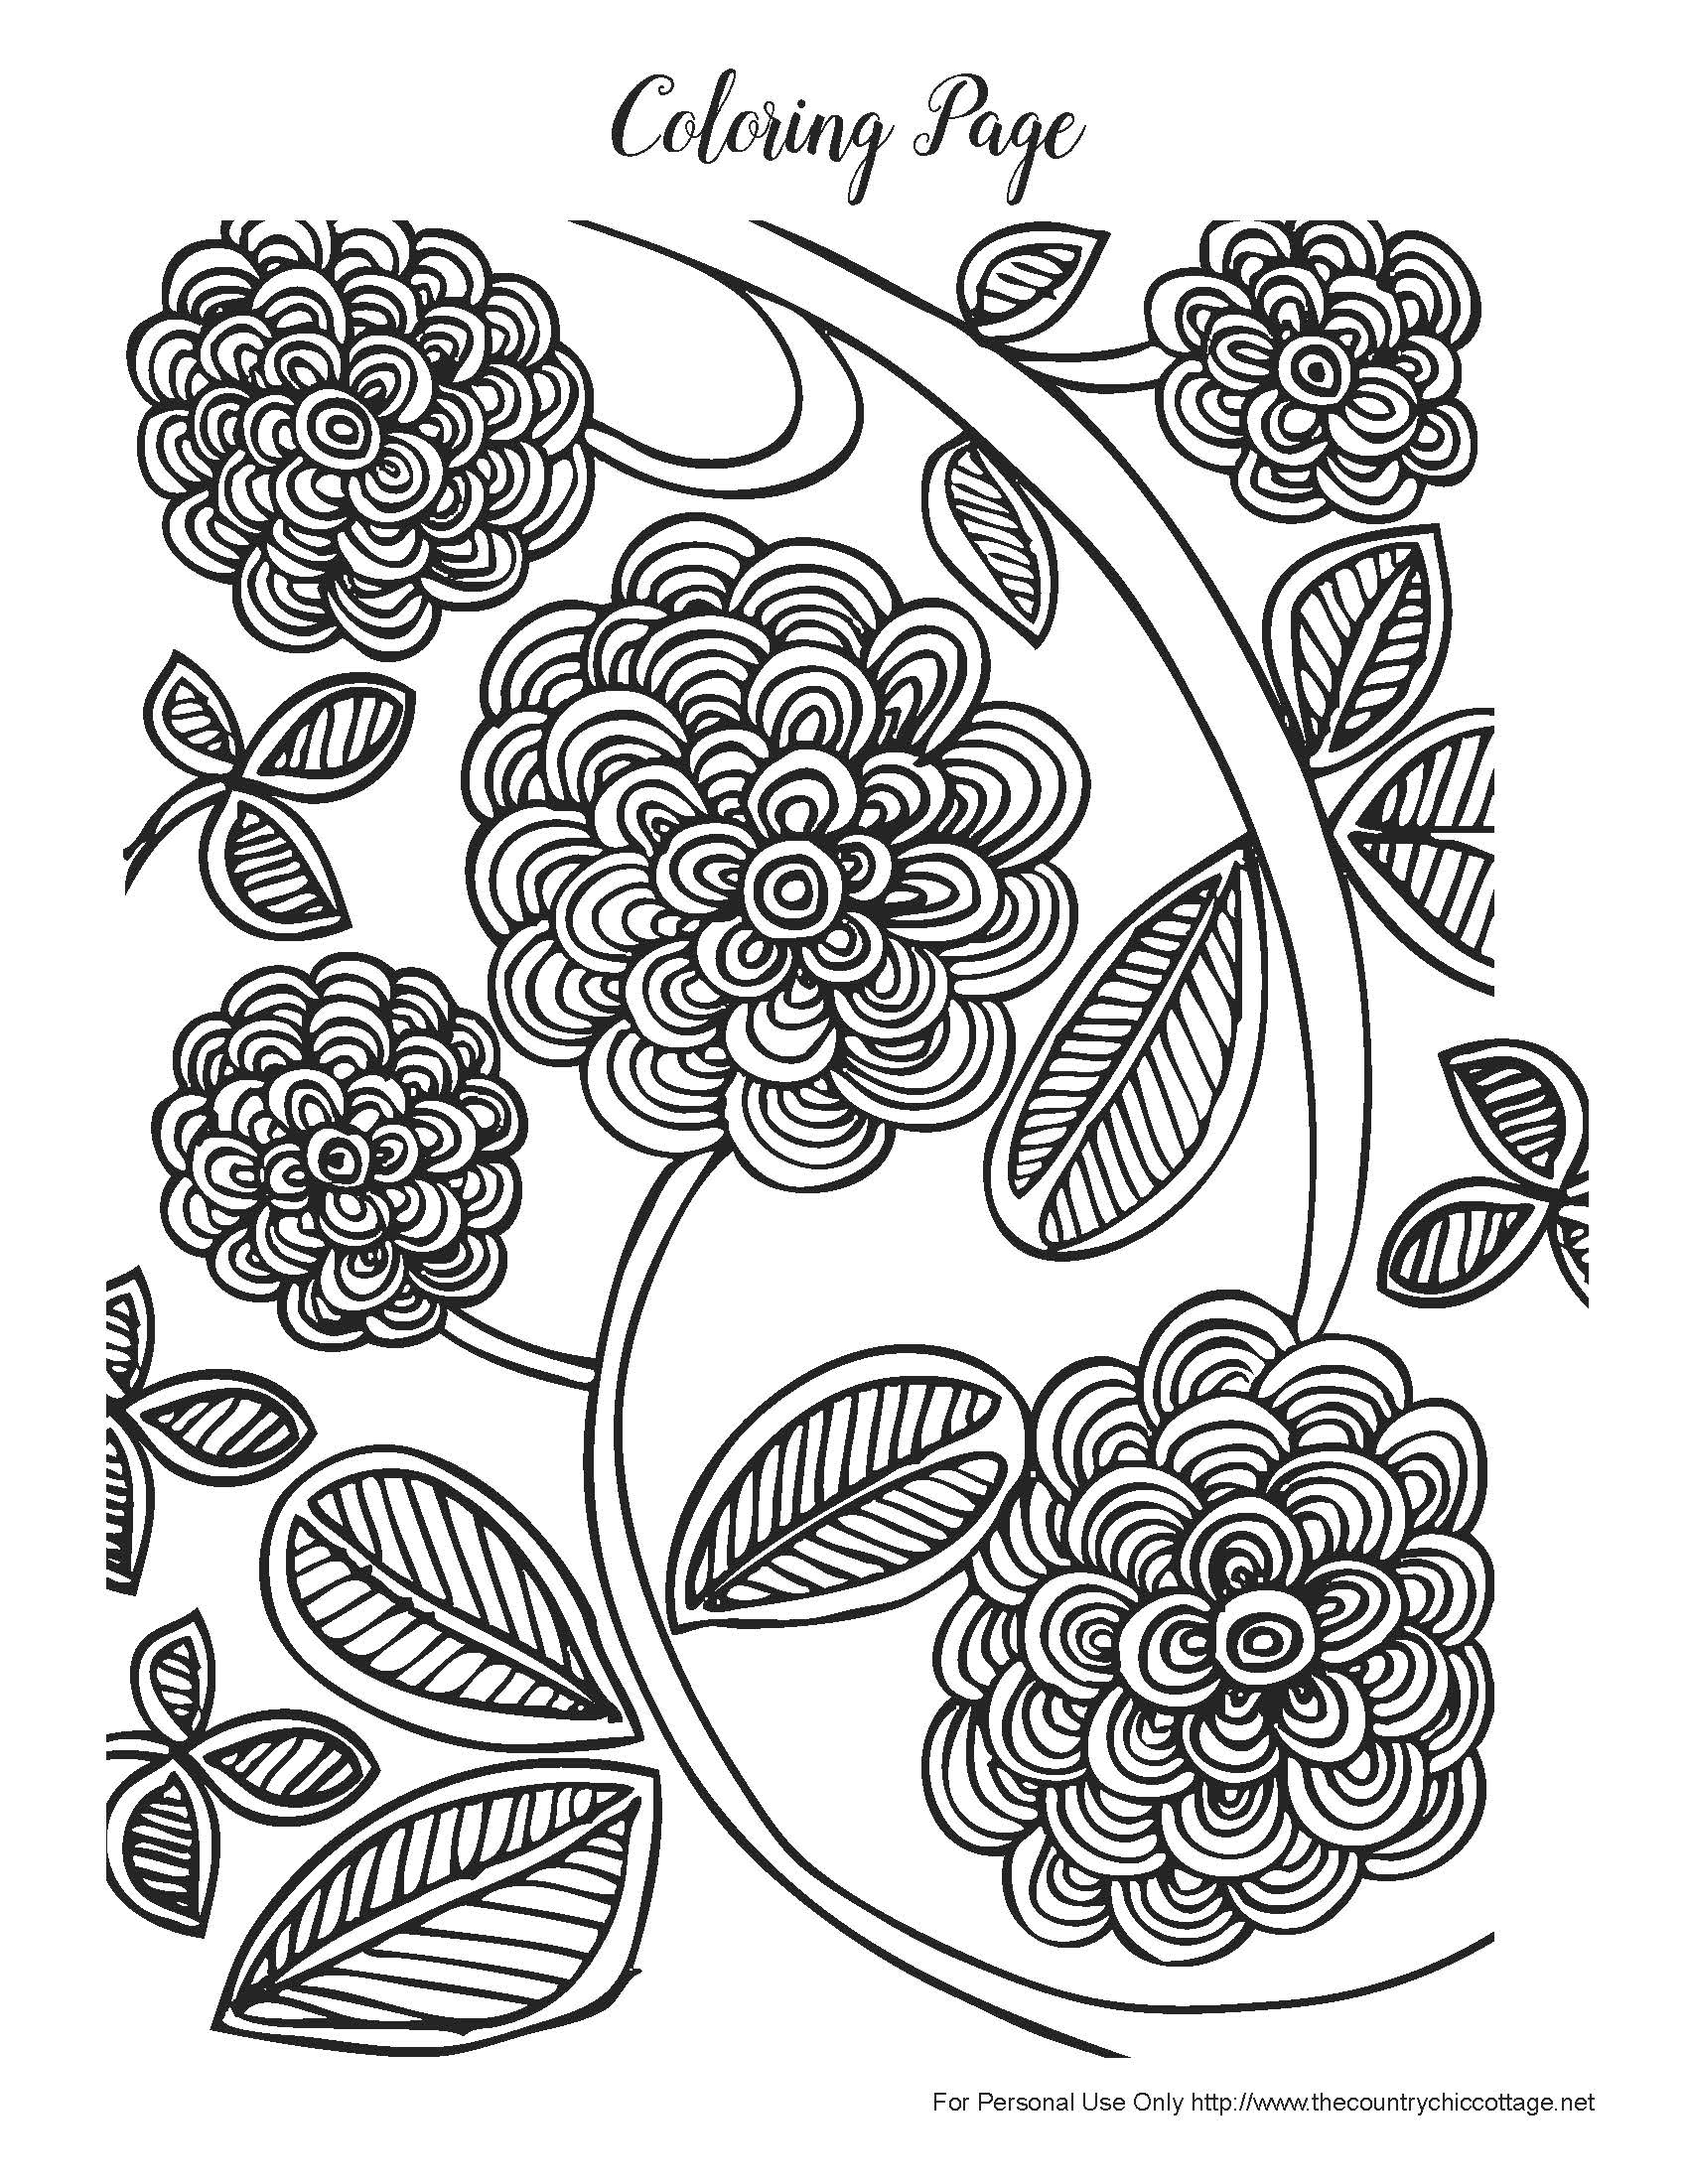 Free Spring Coloring Pages for Adults - The Country Chic ...